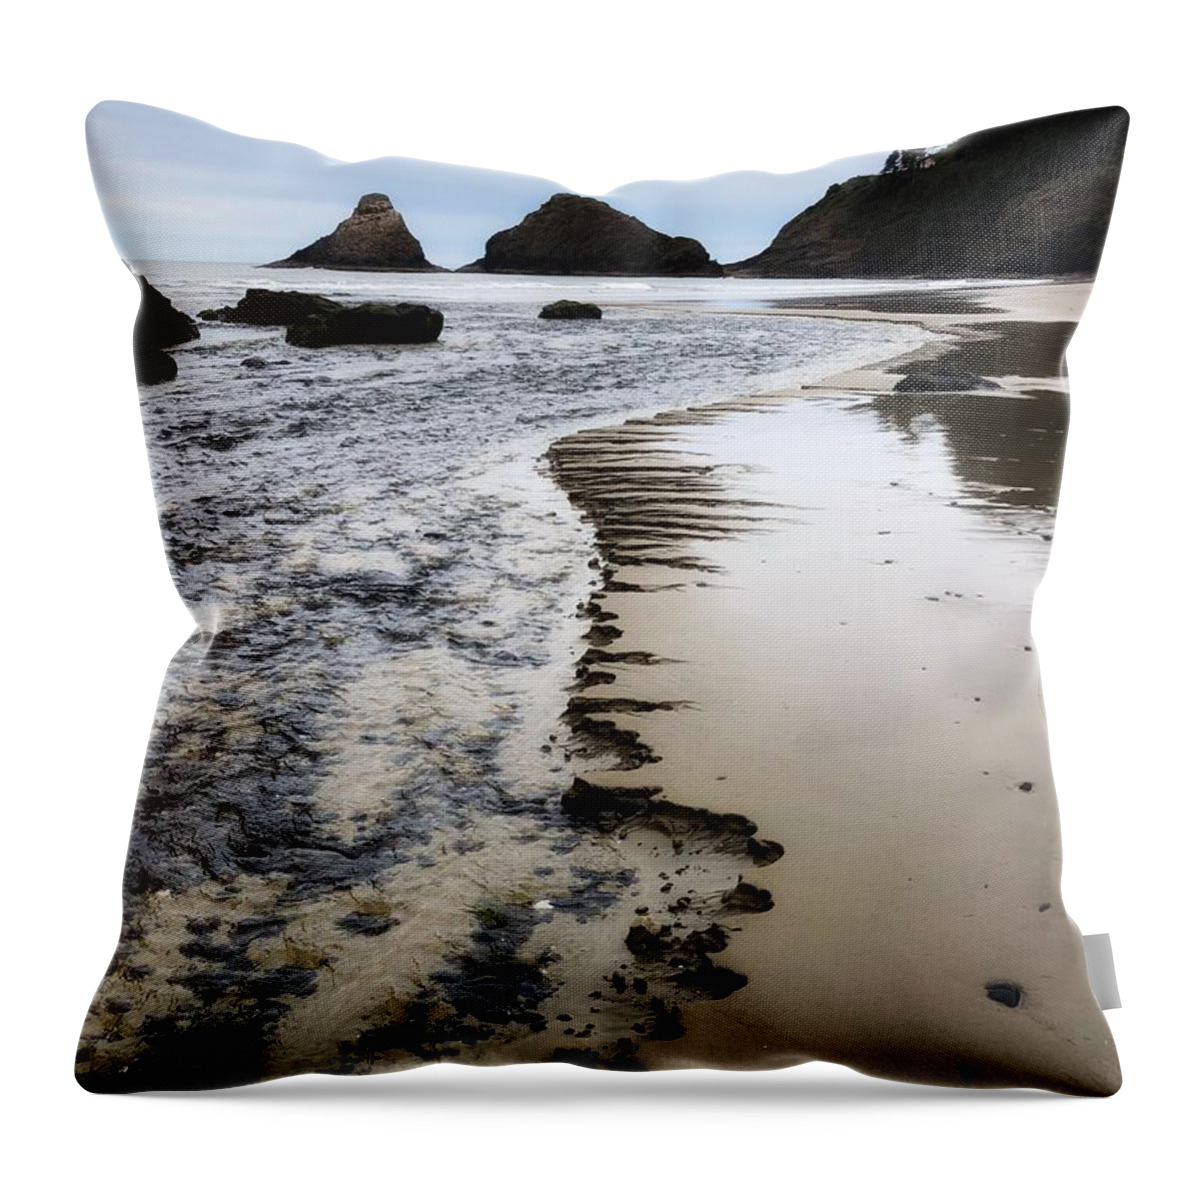 Chiseled Sand Throw Pillow featuring the photograph Chiseled Beach by Bonnie Bruno